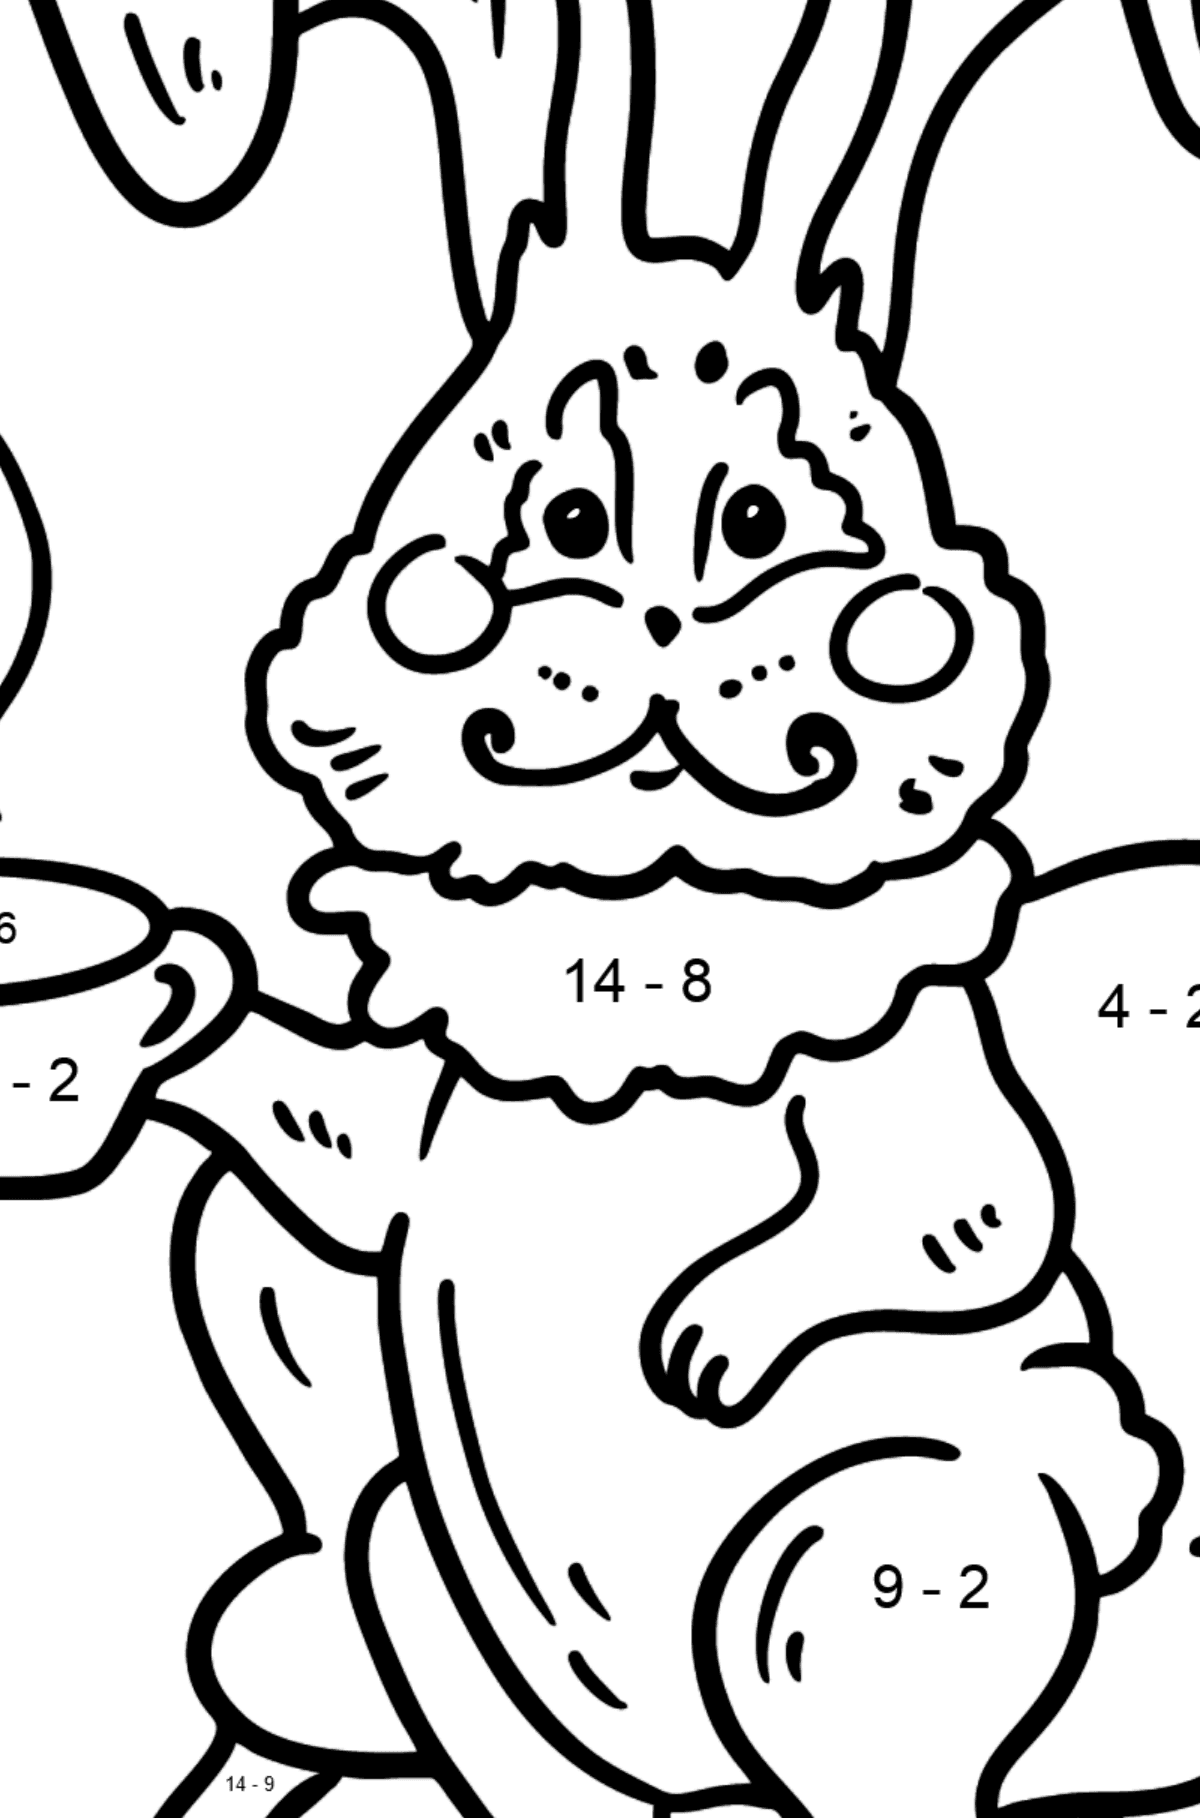 Bunny Sitting coloring page - Math Coloring - Subtraction for Kids